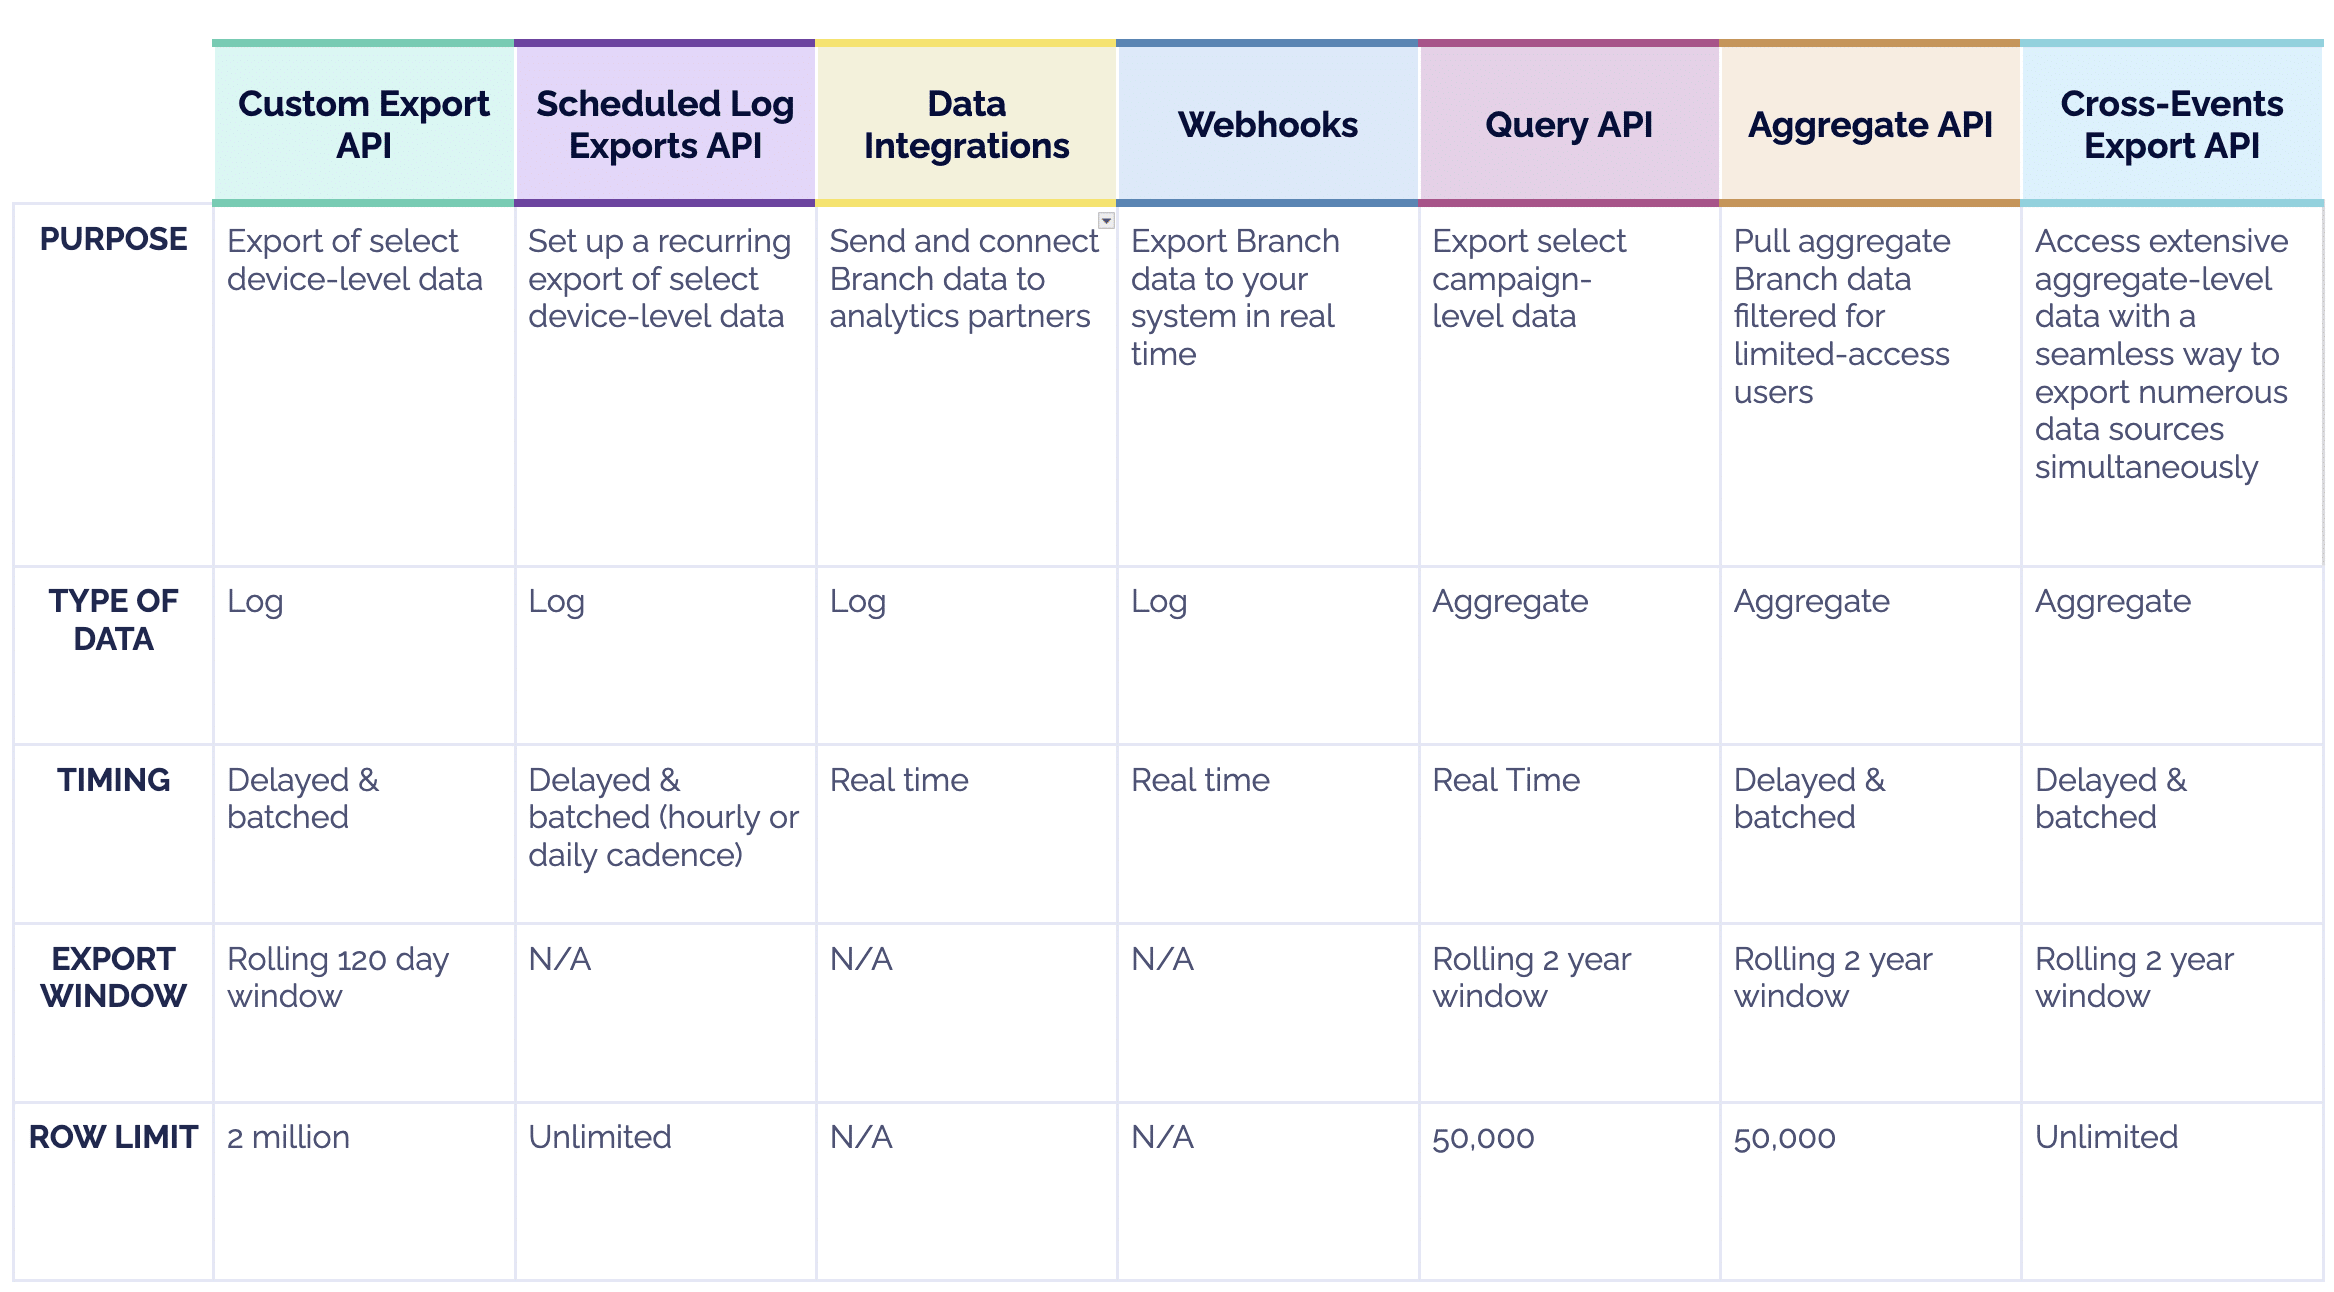 Table showing Branch data export solutions' purpose, type of data, timing, export window, and row limits. 